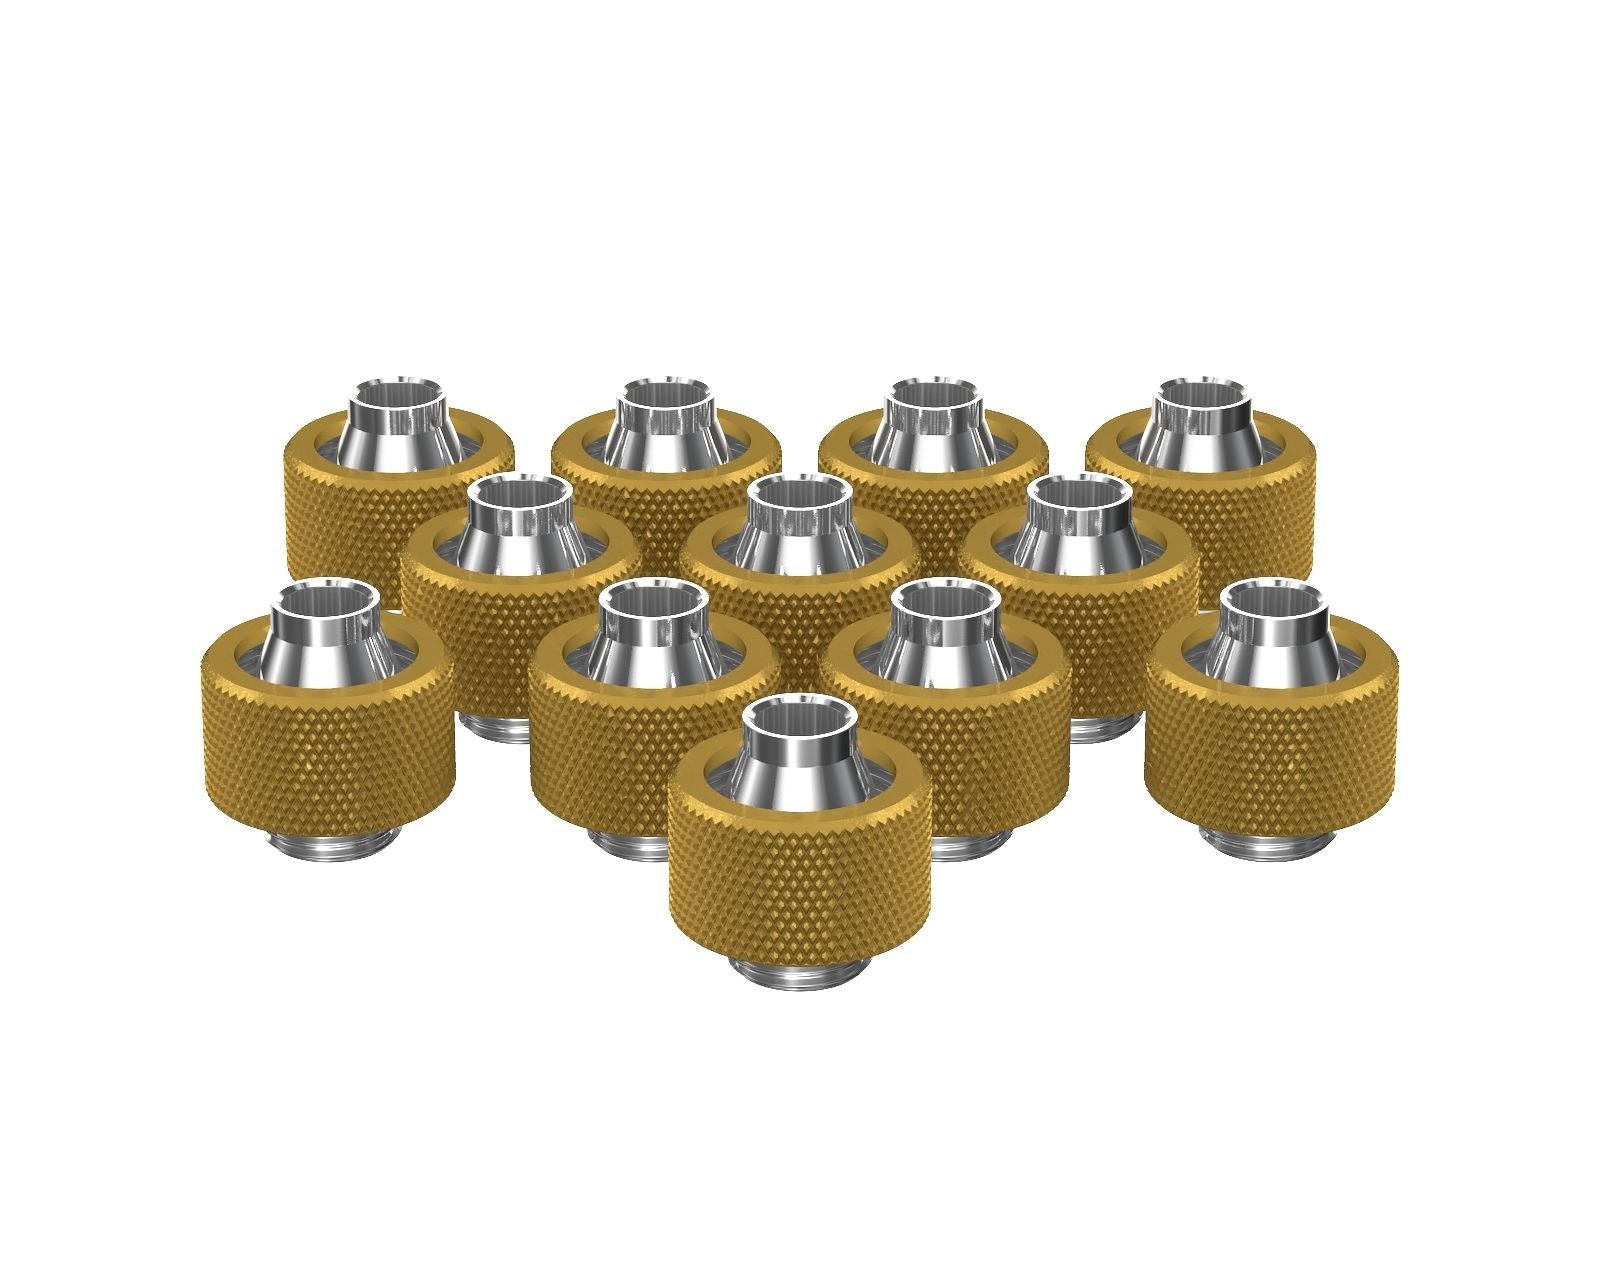 PrimoChill SecureFit SX - Premium Compression Fitting For 7/16in ID x 5/8in OD Flexible Tubing 12 Pack (F-SFSX758-12) - Available in 20+ Colors, Custom Watercooling Loop Ready - Gold